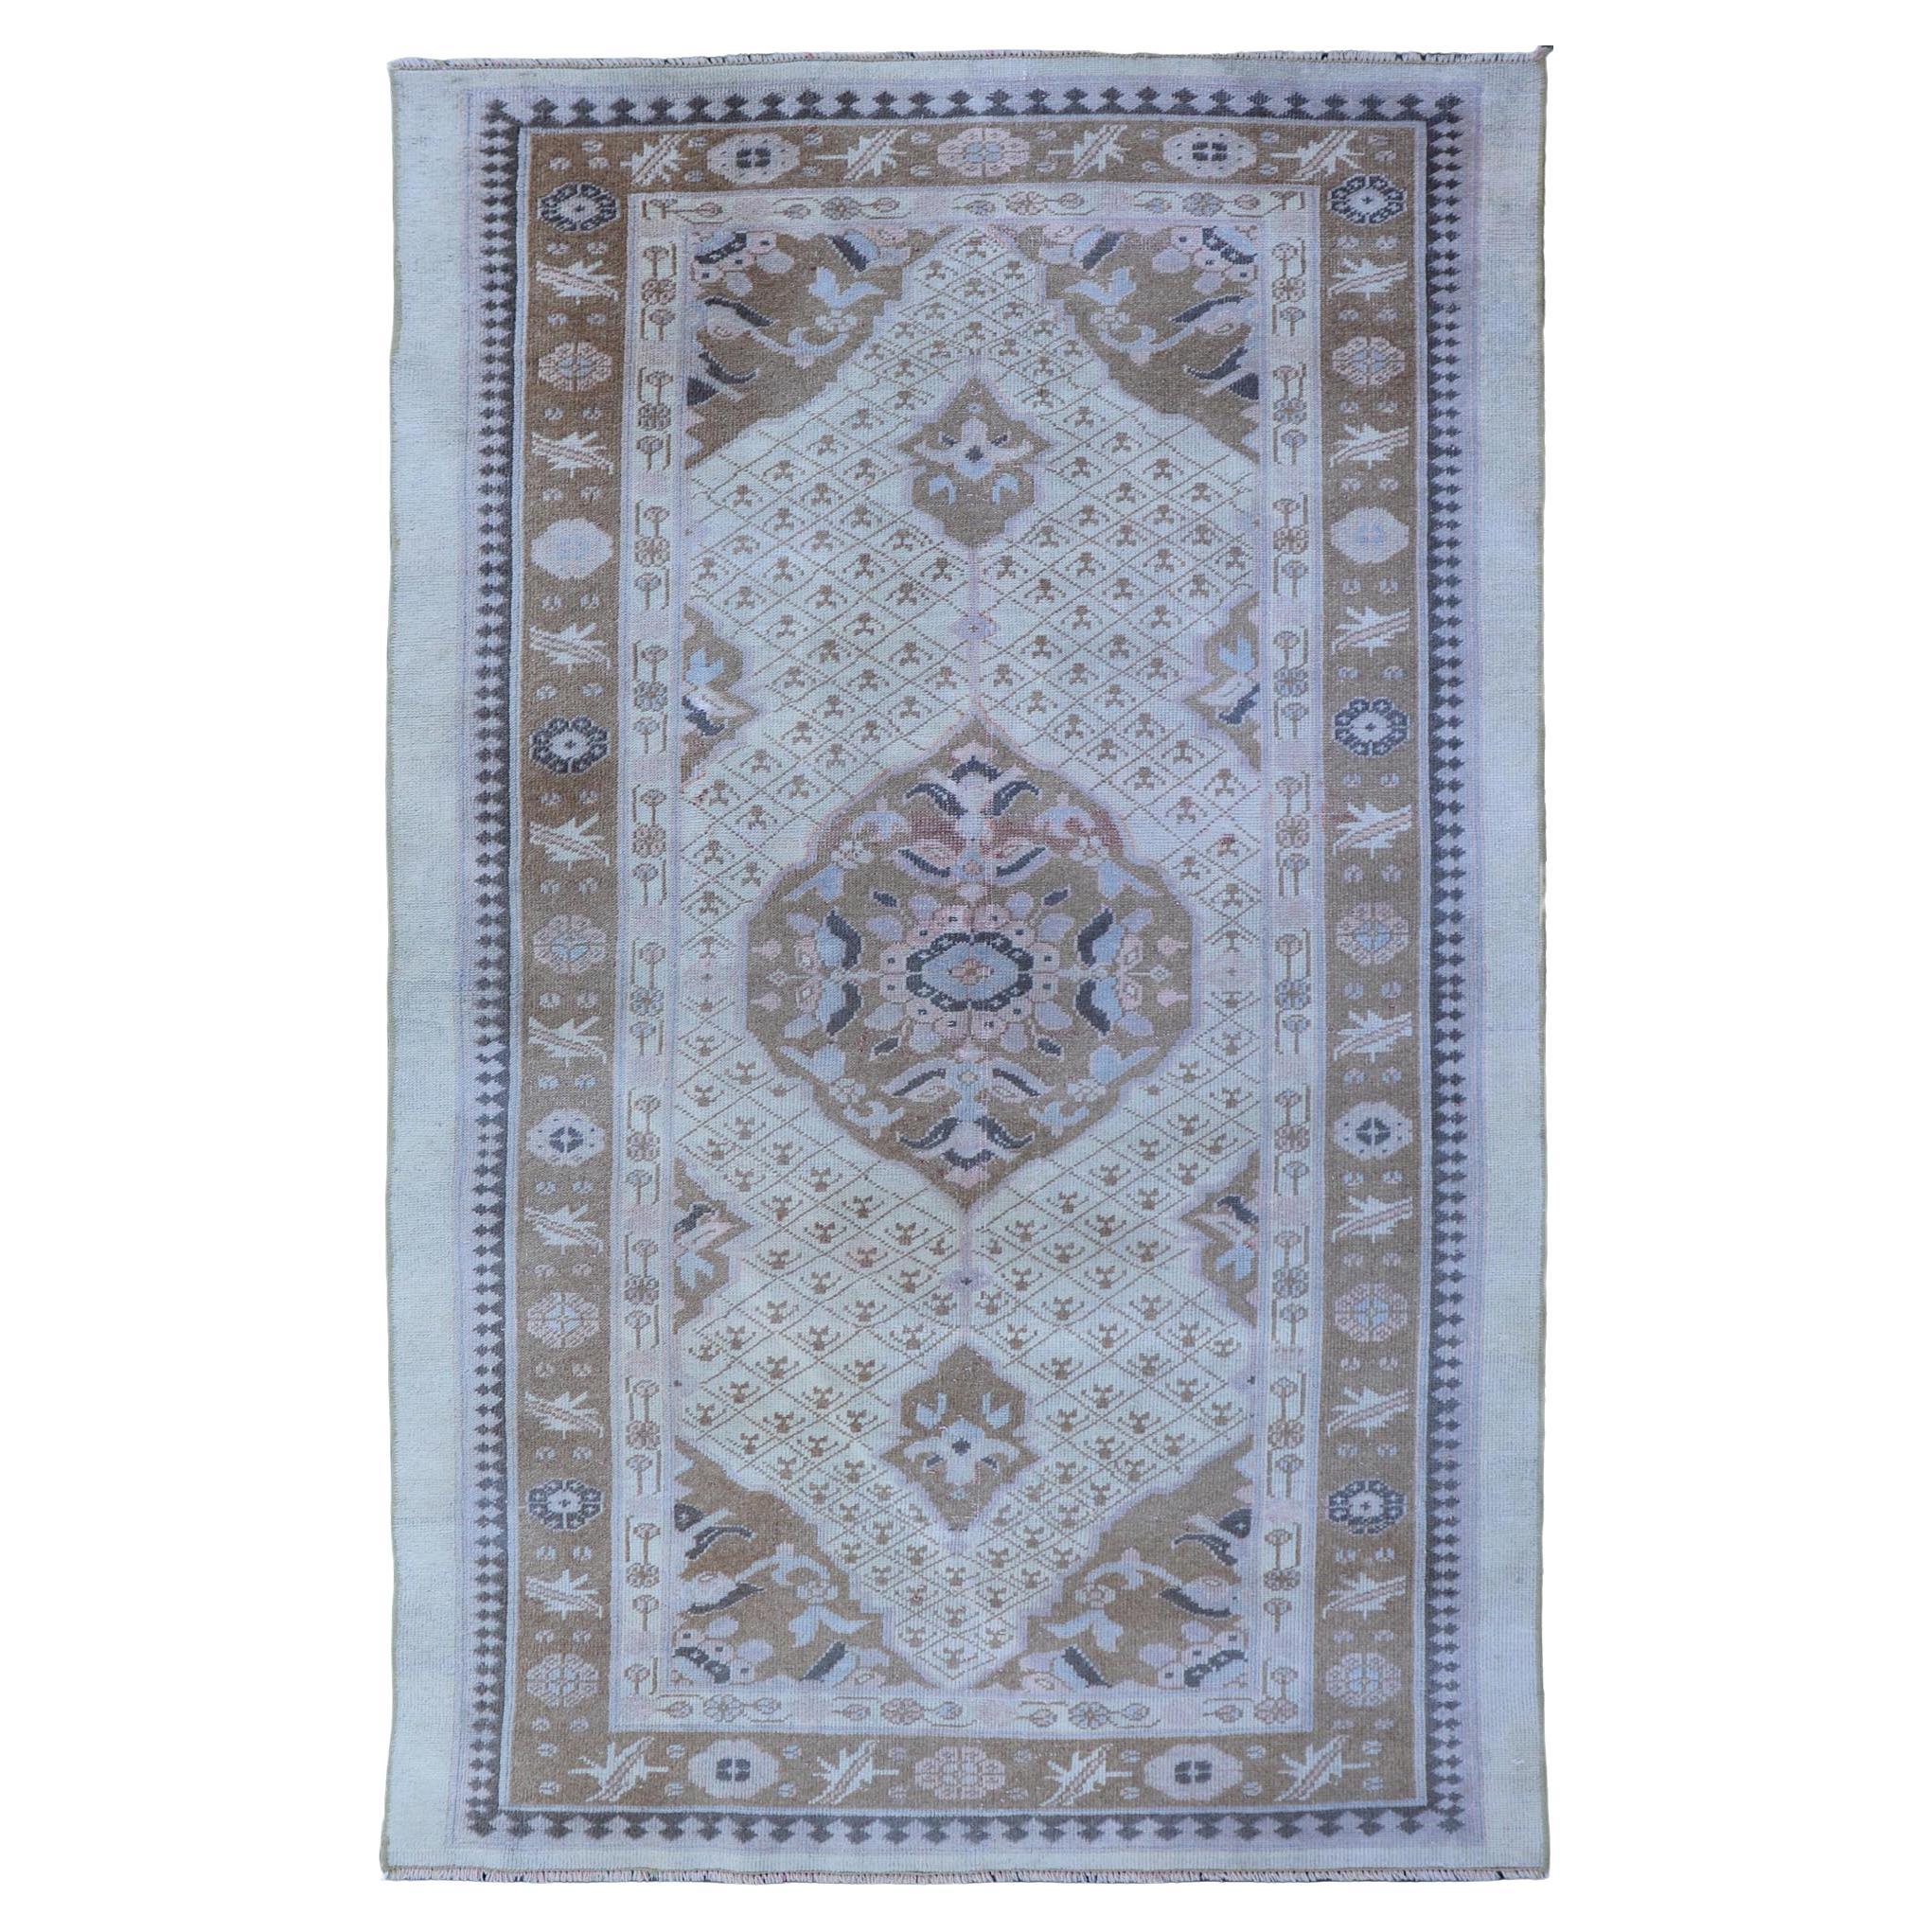 Antique Persian Serab Small Rug in Brown, Tan and Neutrals For Sale